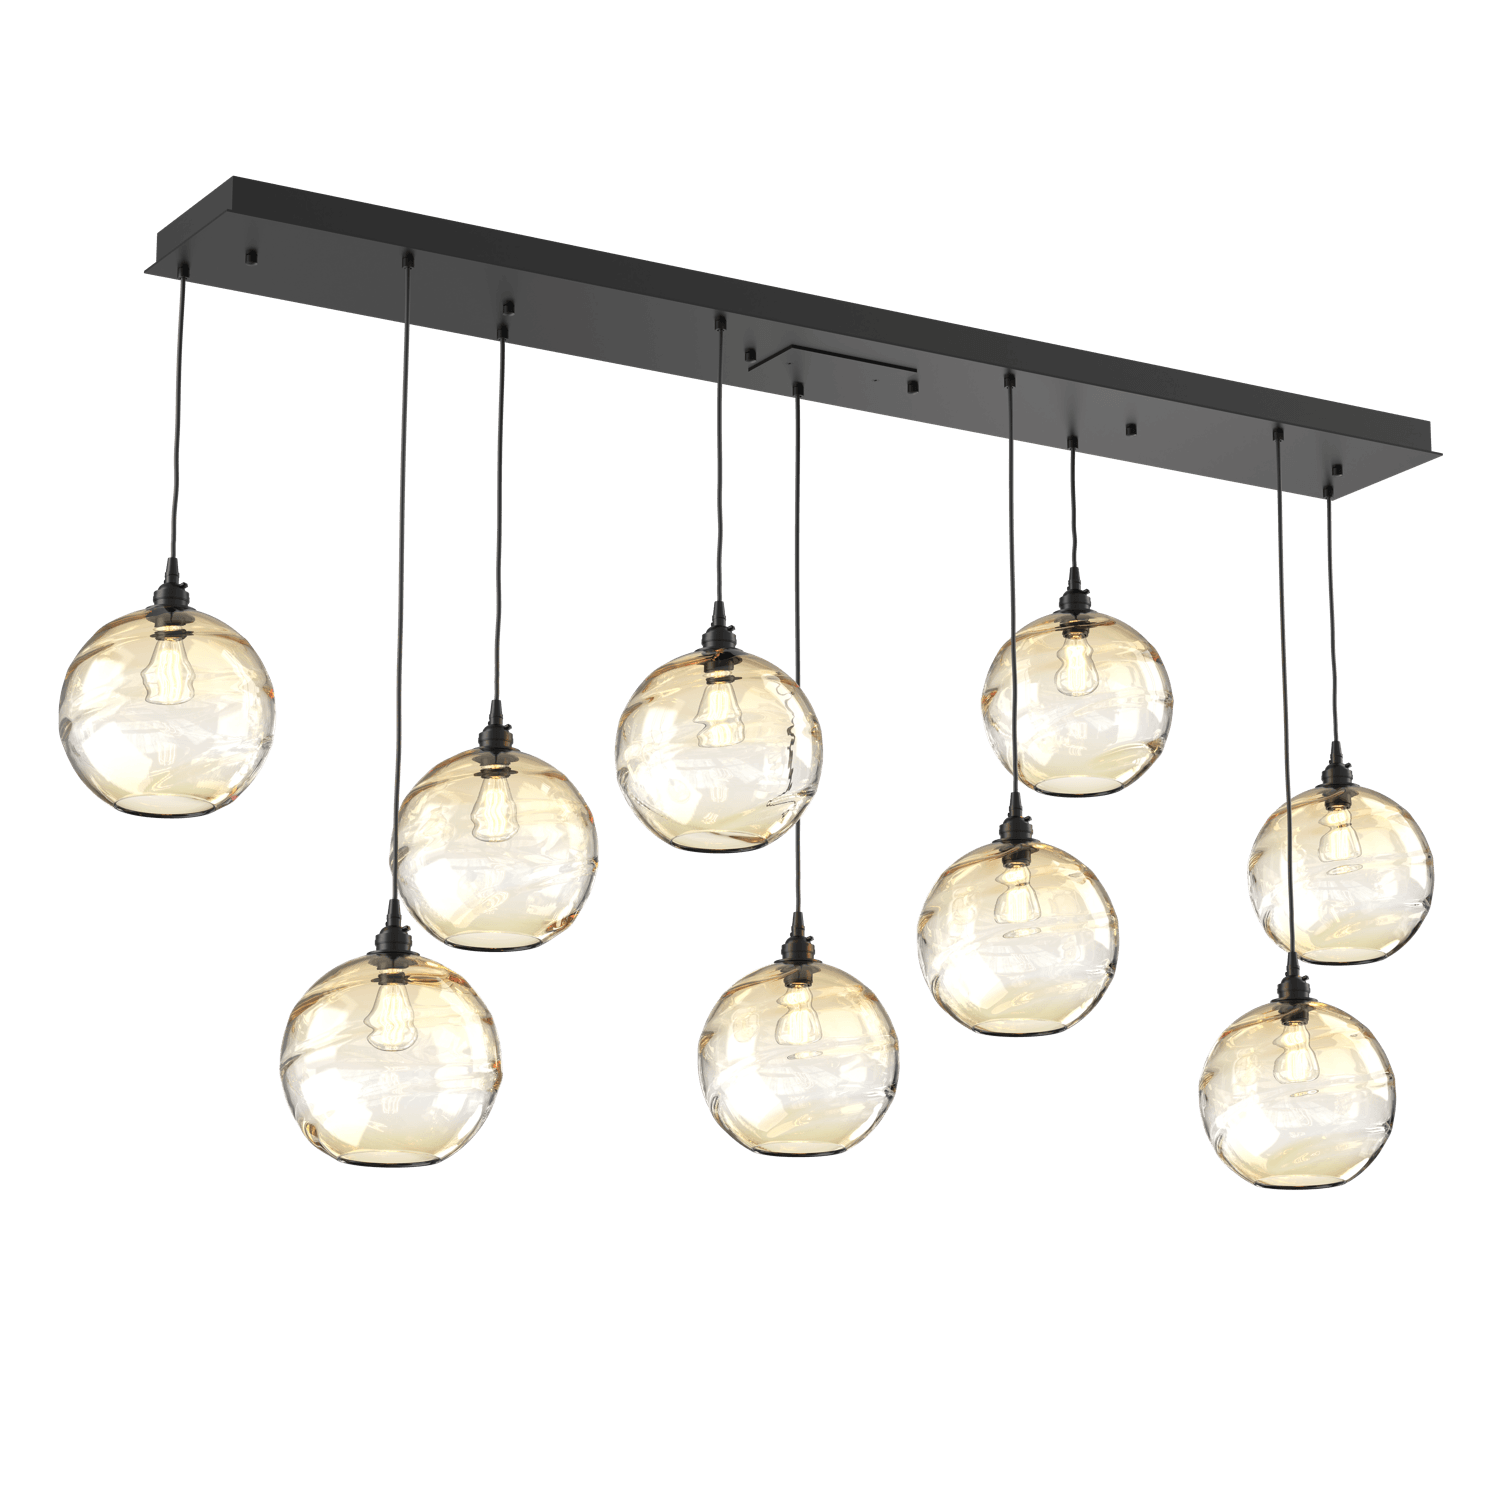 PLB0047-09-MB-OA-Hammerton-Studio-Optic-Blown-Glass-Terra-9-light-linear-pendant-chandelier-with-matte-black-finish-and-optic-amber-blown-glass-shades-and-incandescent-lamping